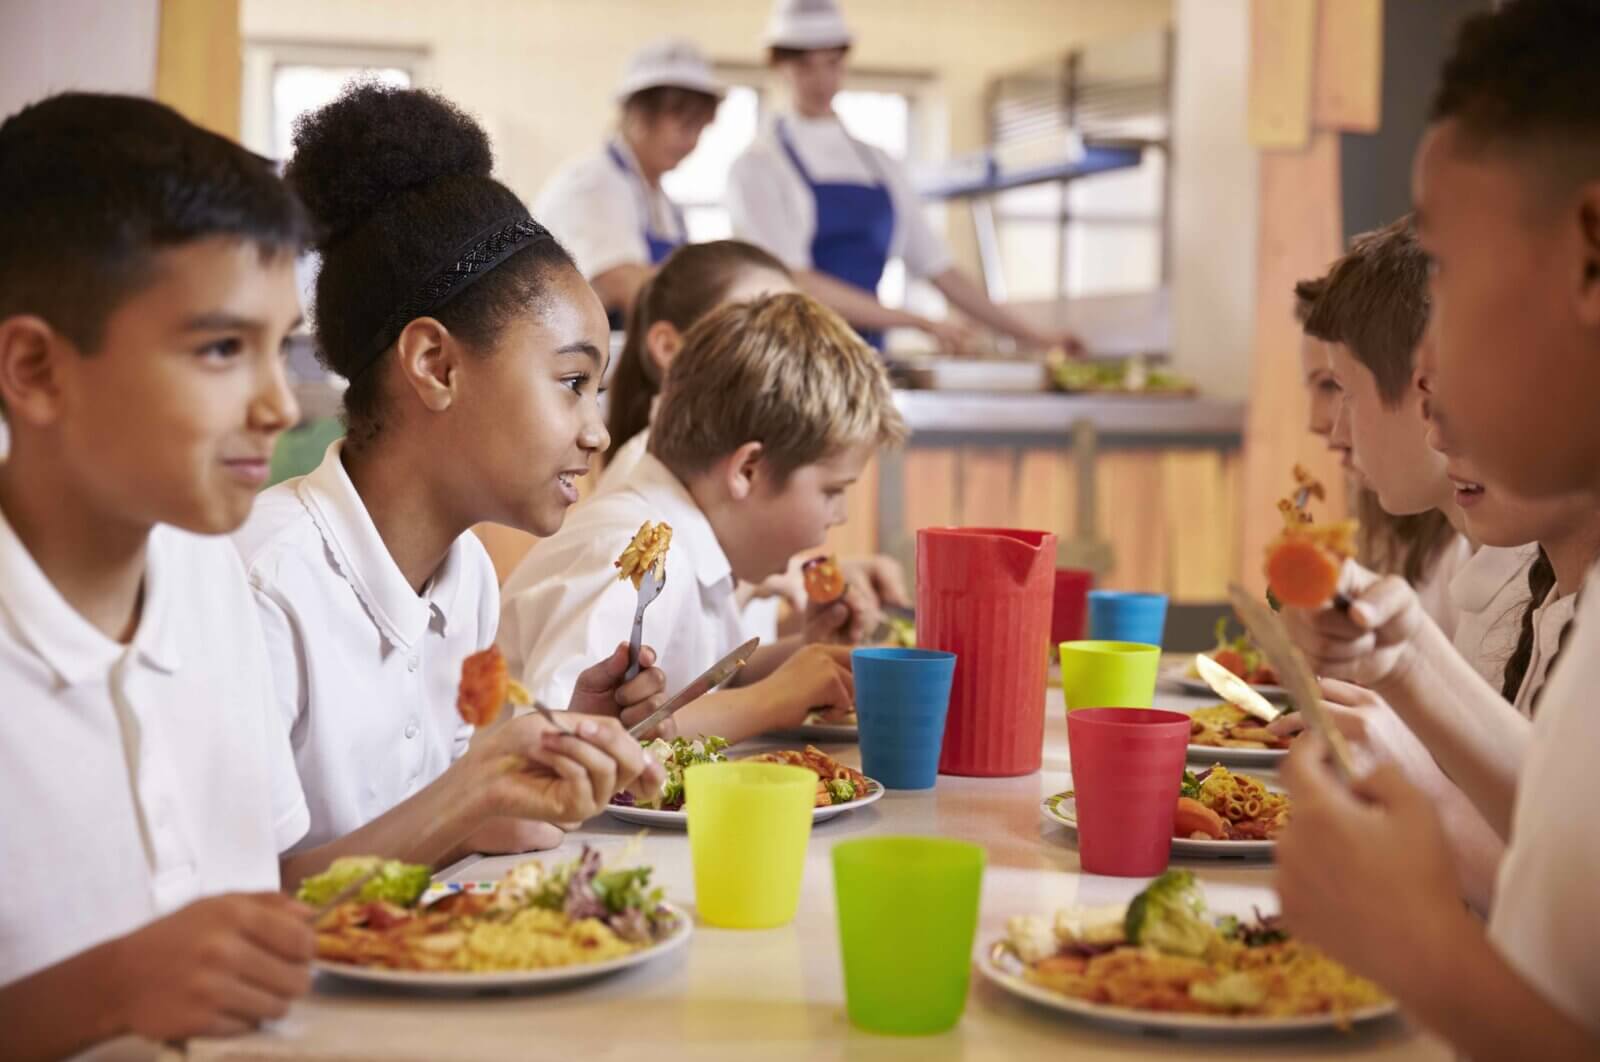 children in white polo tshirts sitting around a long table eating plates of food. Coloured drinks beakers in blue yellow red and green on the table. Blurred images of kitchen staff can be seen in the background